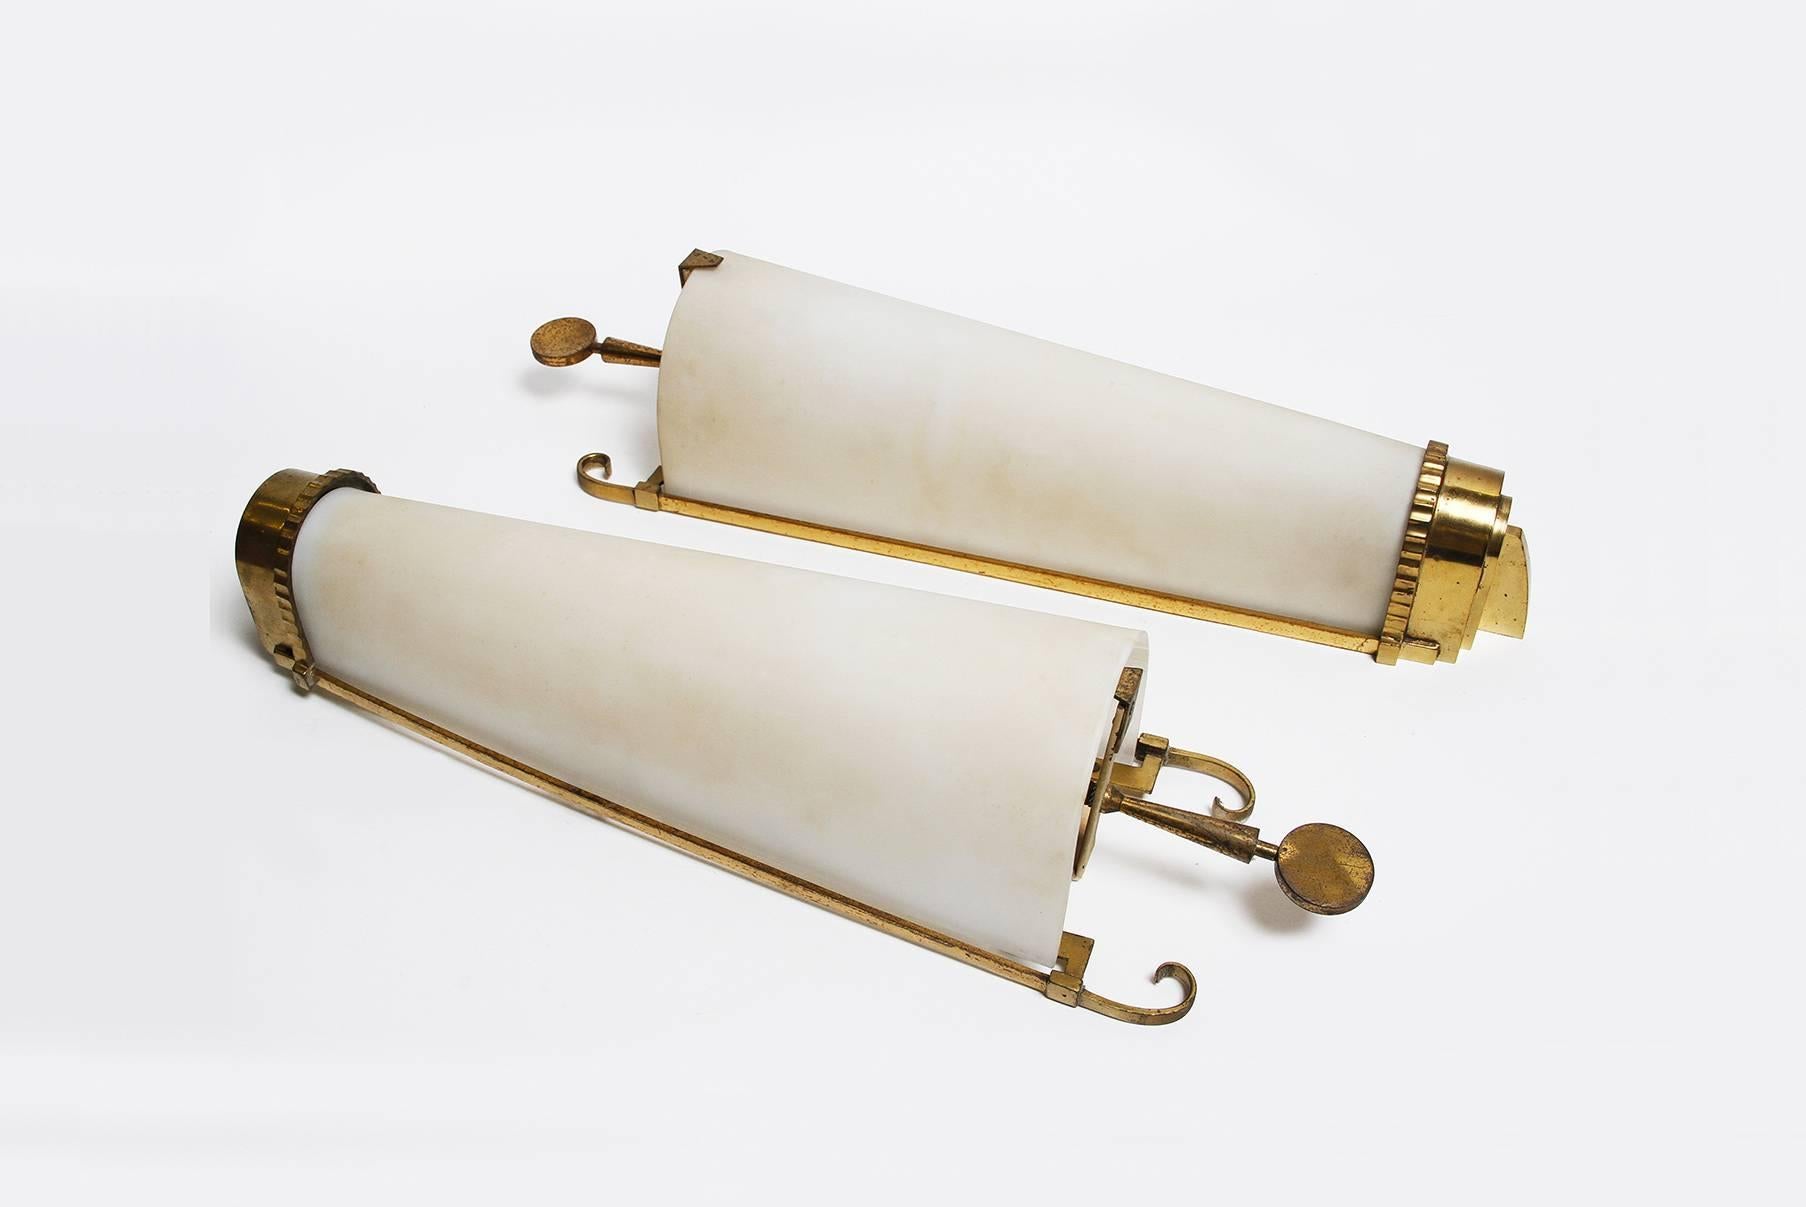 Ets Petitot
Important pair of gilt bronze, gilt iron and frosted glass sconces, France, circa 1930.
Stamped PETITOT on the frame.
Not rewired yet, two original sockets and lightbulbs.
Will be re-wired with no additional costs.
Measures: H 22